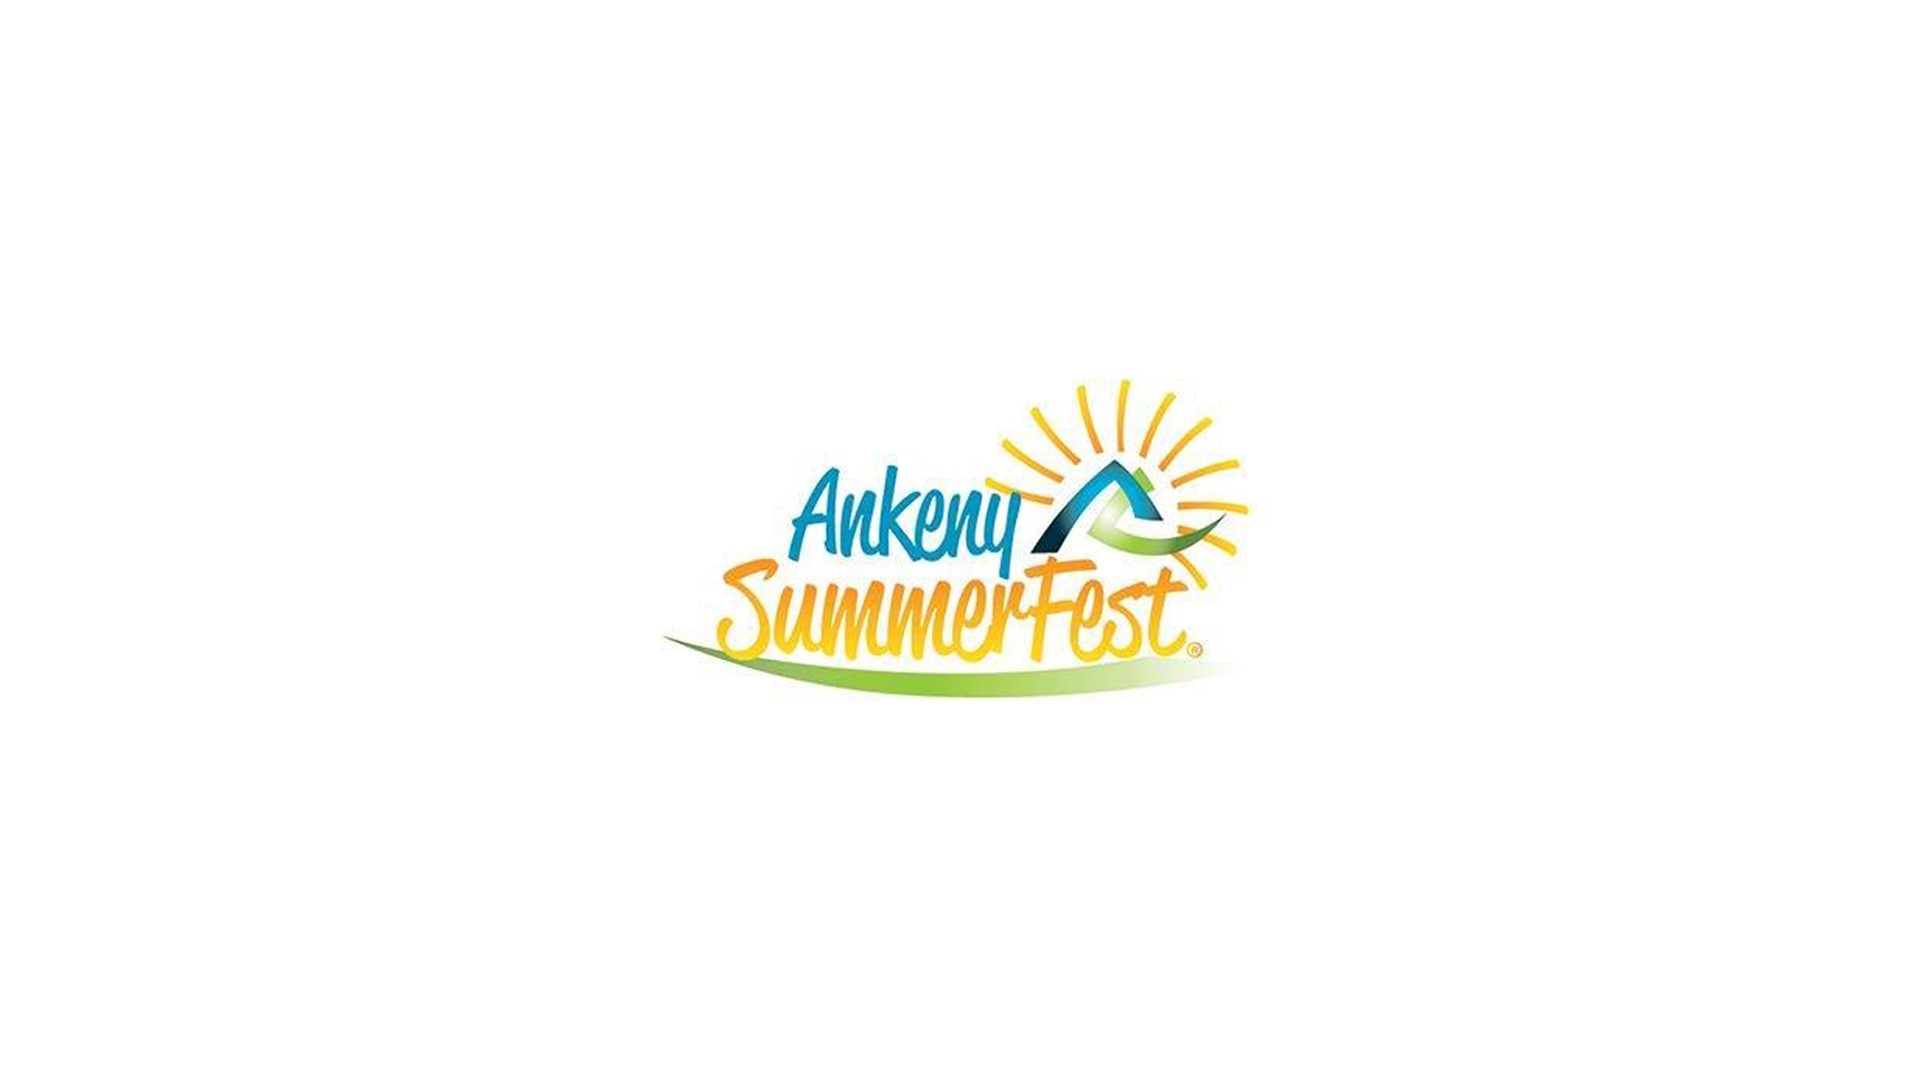 The Ankeny Area Chamber of Commerce announced the move Tuesday, along with the theme for this year's Summerfest.